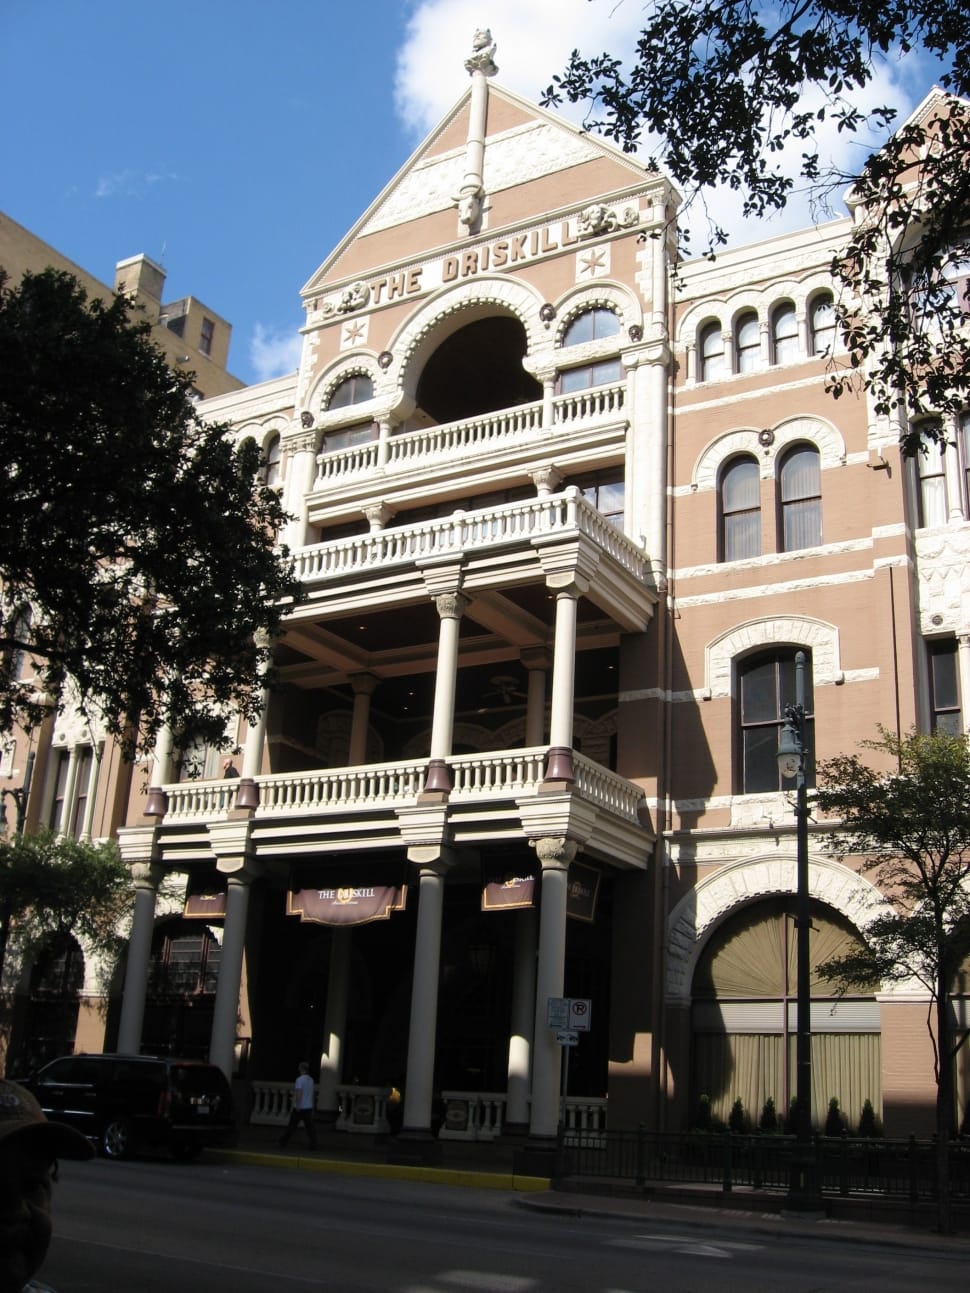 Hotel, Driskill, Austin, Downtown, Texas, architecture, low angle view preview